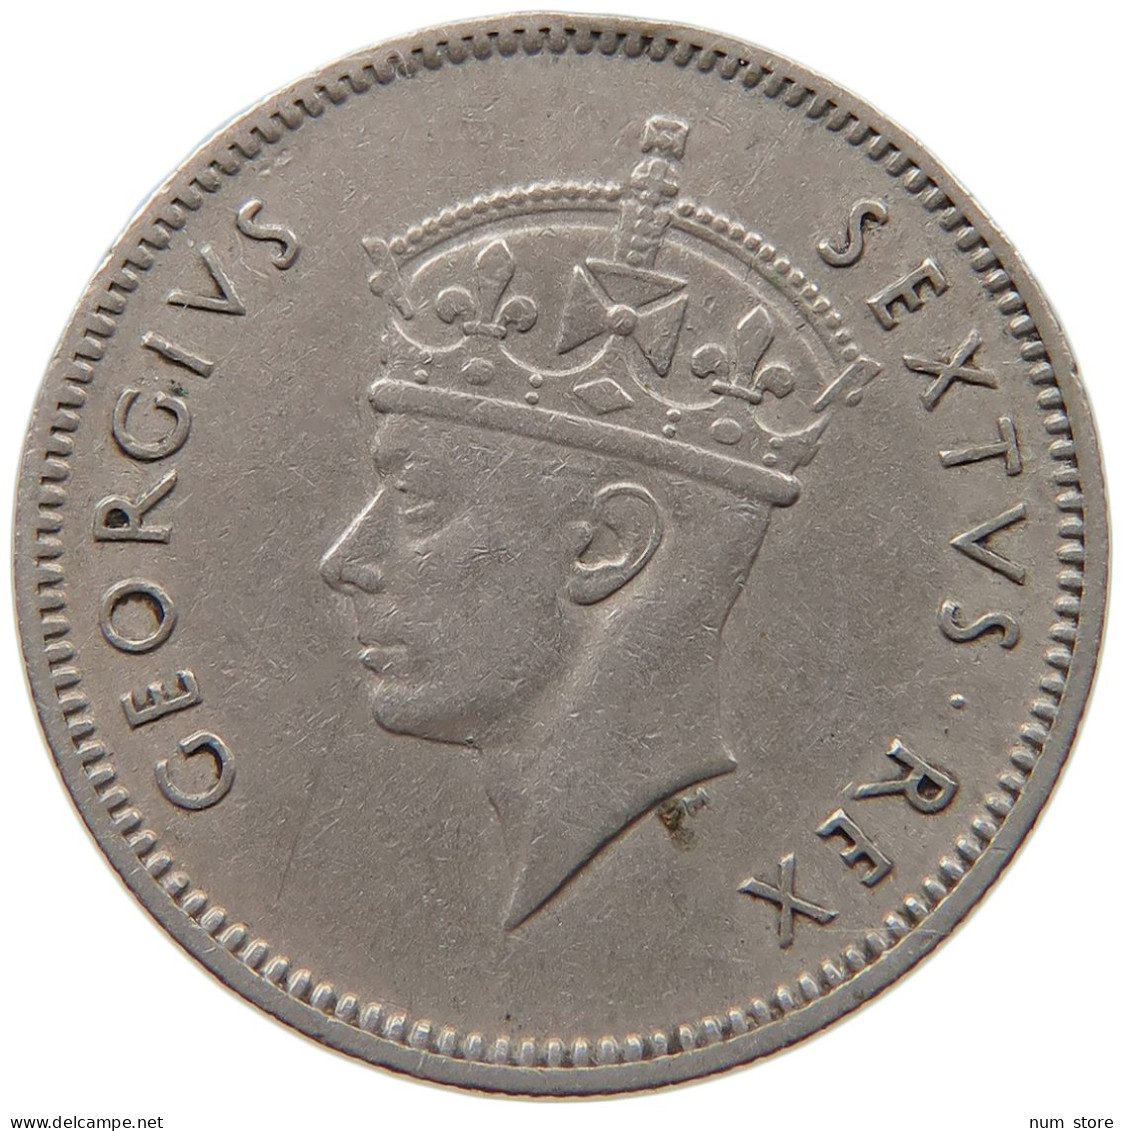 BRITISH EAST AFRICA 50 CENTS 1948 GEORGE VI. (1936-1952) #MA 099786 - Colonia Británica